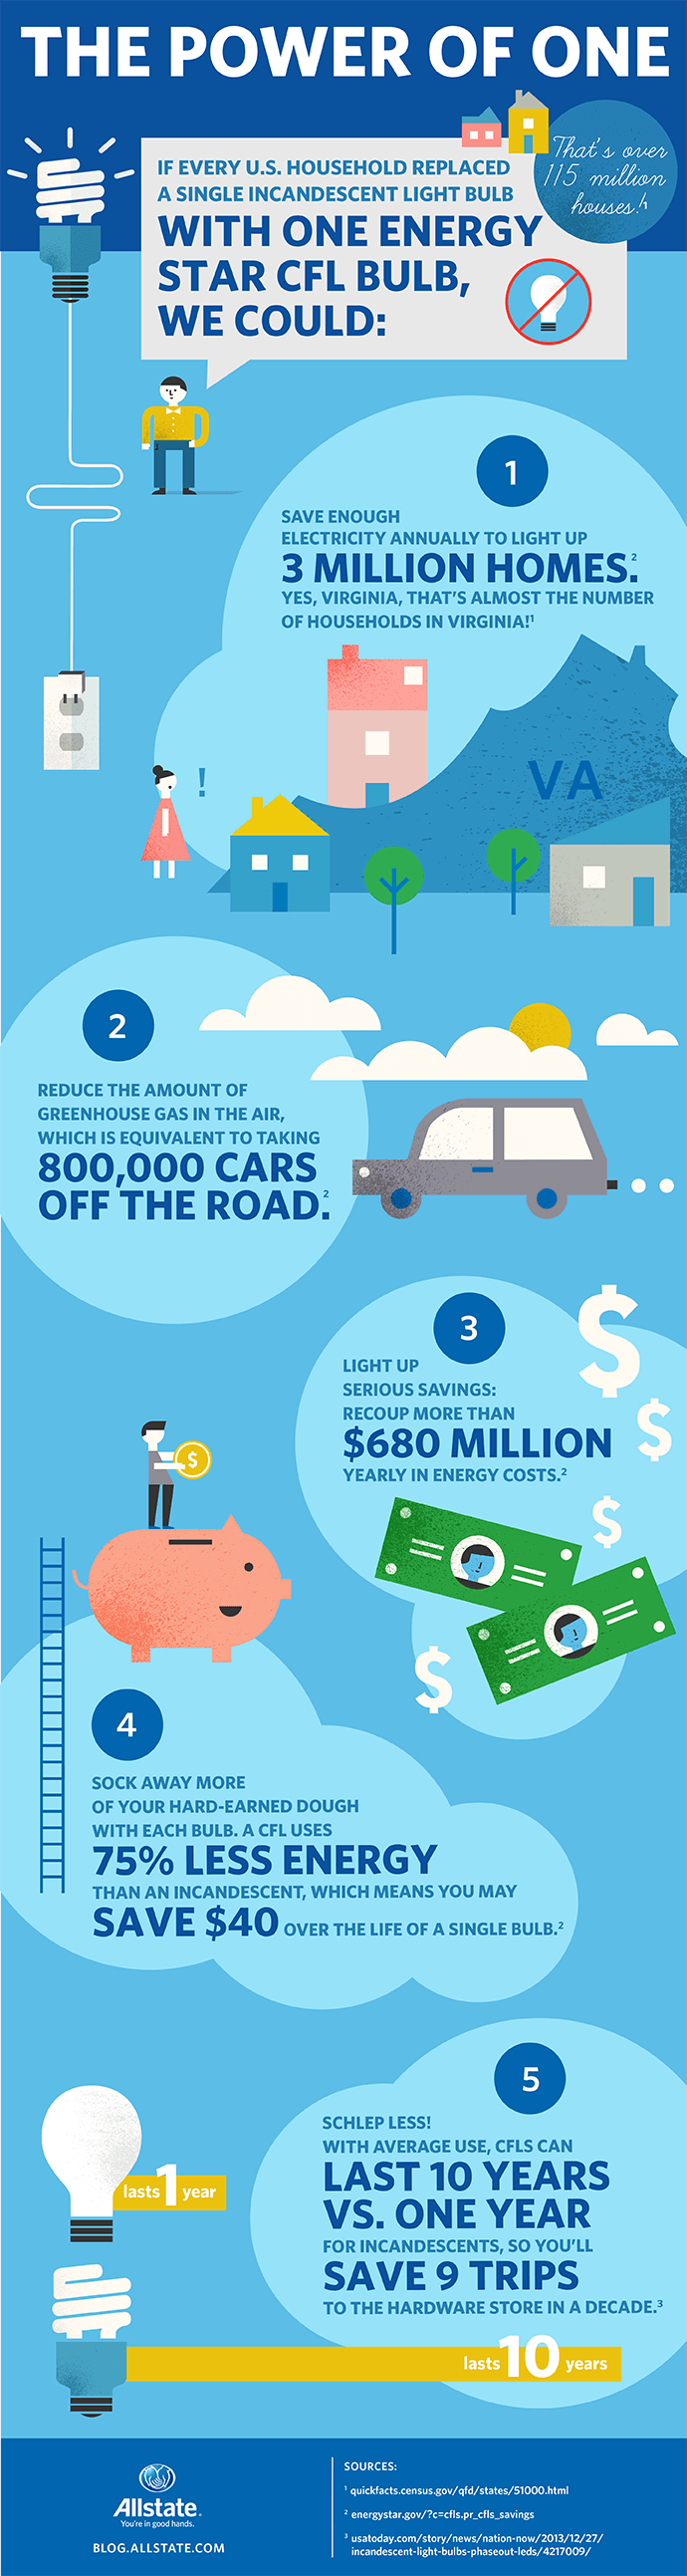 allstate_infographic_r21